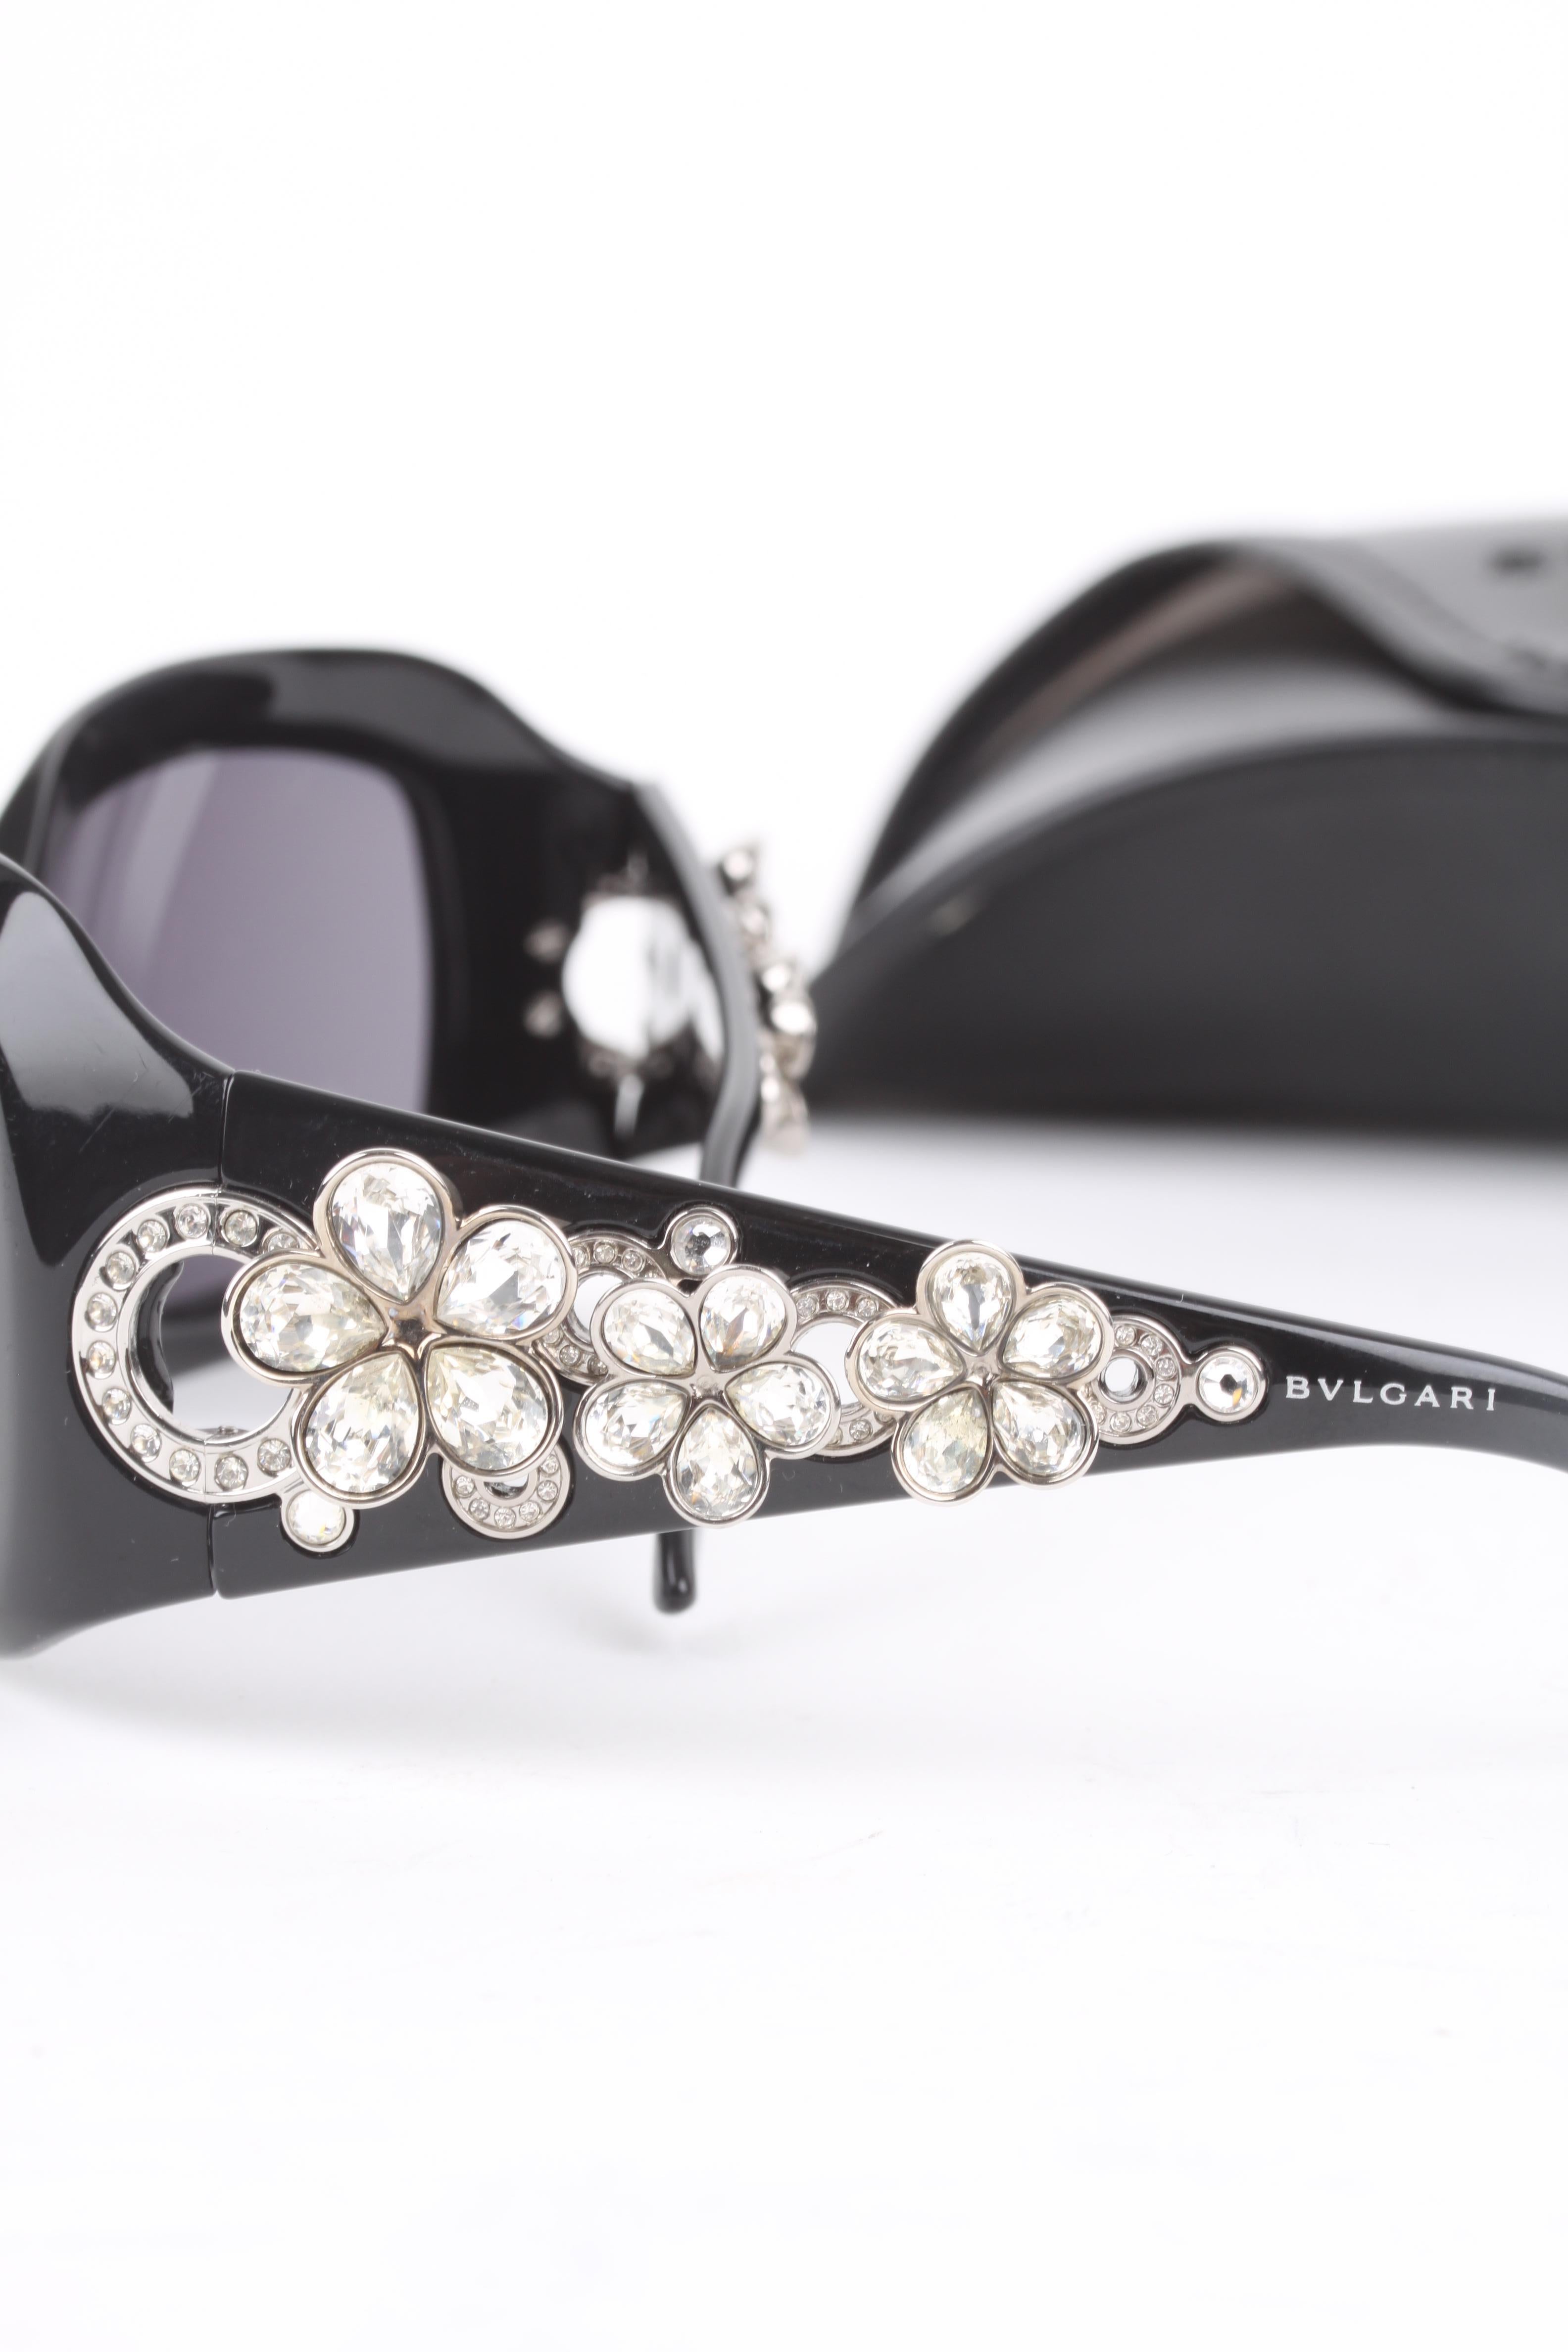 Bvlgari black swarovski crystal flower sunglasses.

Since 1884, Bulgari has been placing the pace for Italian style in jewellery. A ceativation spirit which never ceases to draw inspiration from the timeless beauty of Greek and Roman art, while